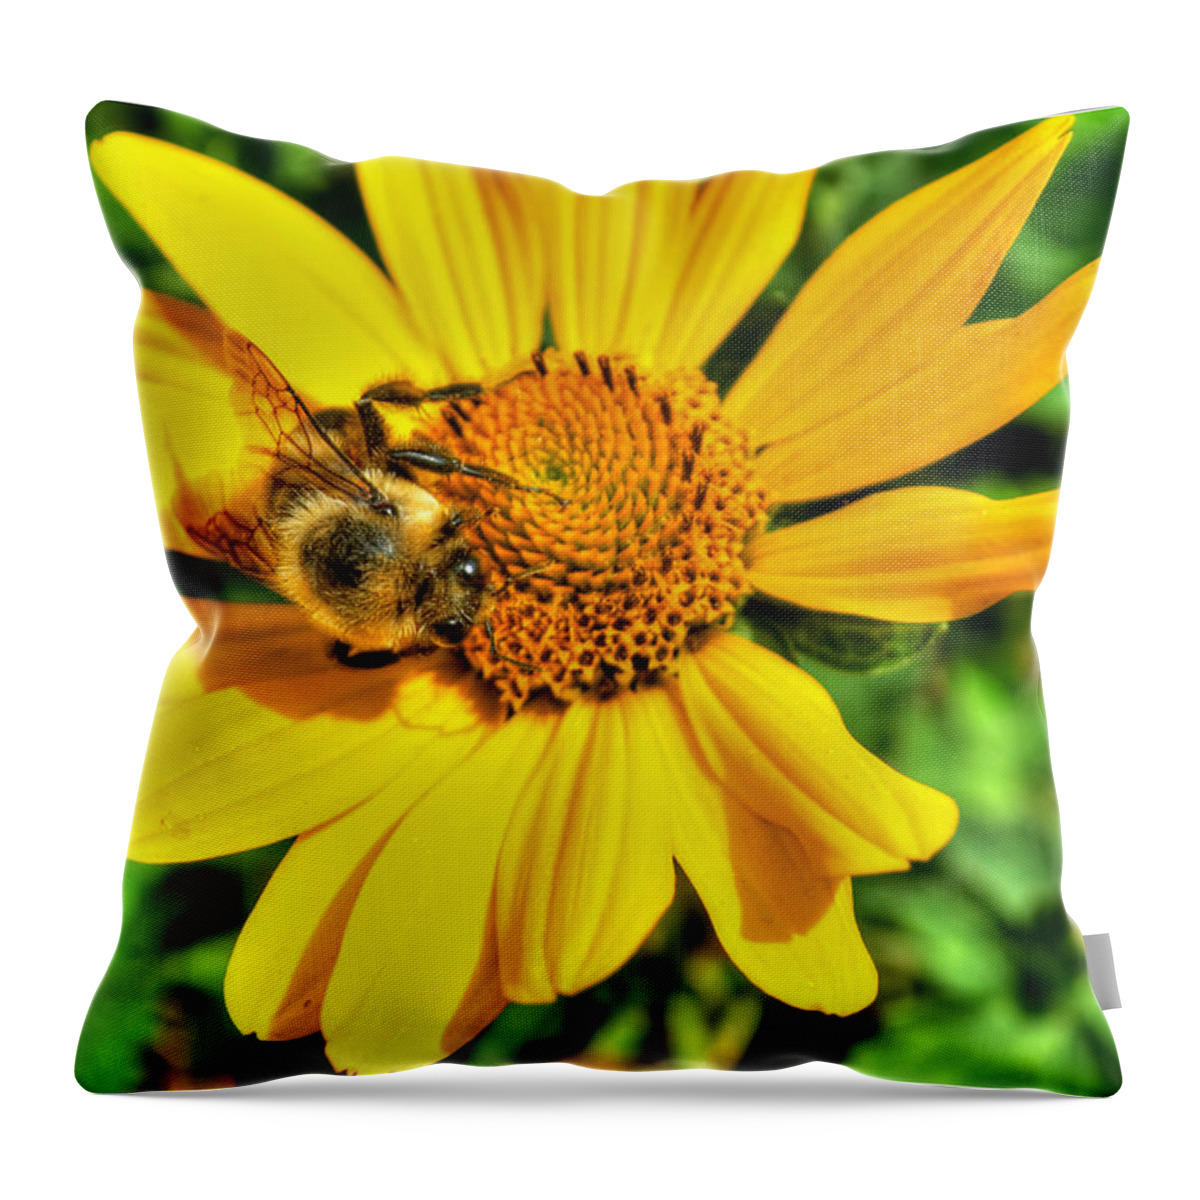  Throw Pillow featuring the photograph 003 Busy Bee Series by Michael Frank Jr